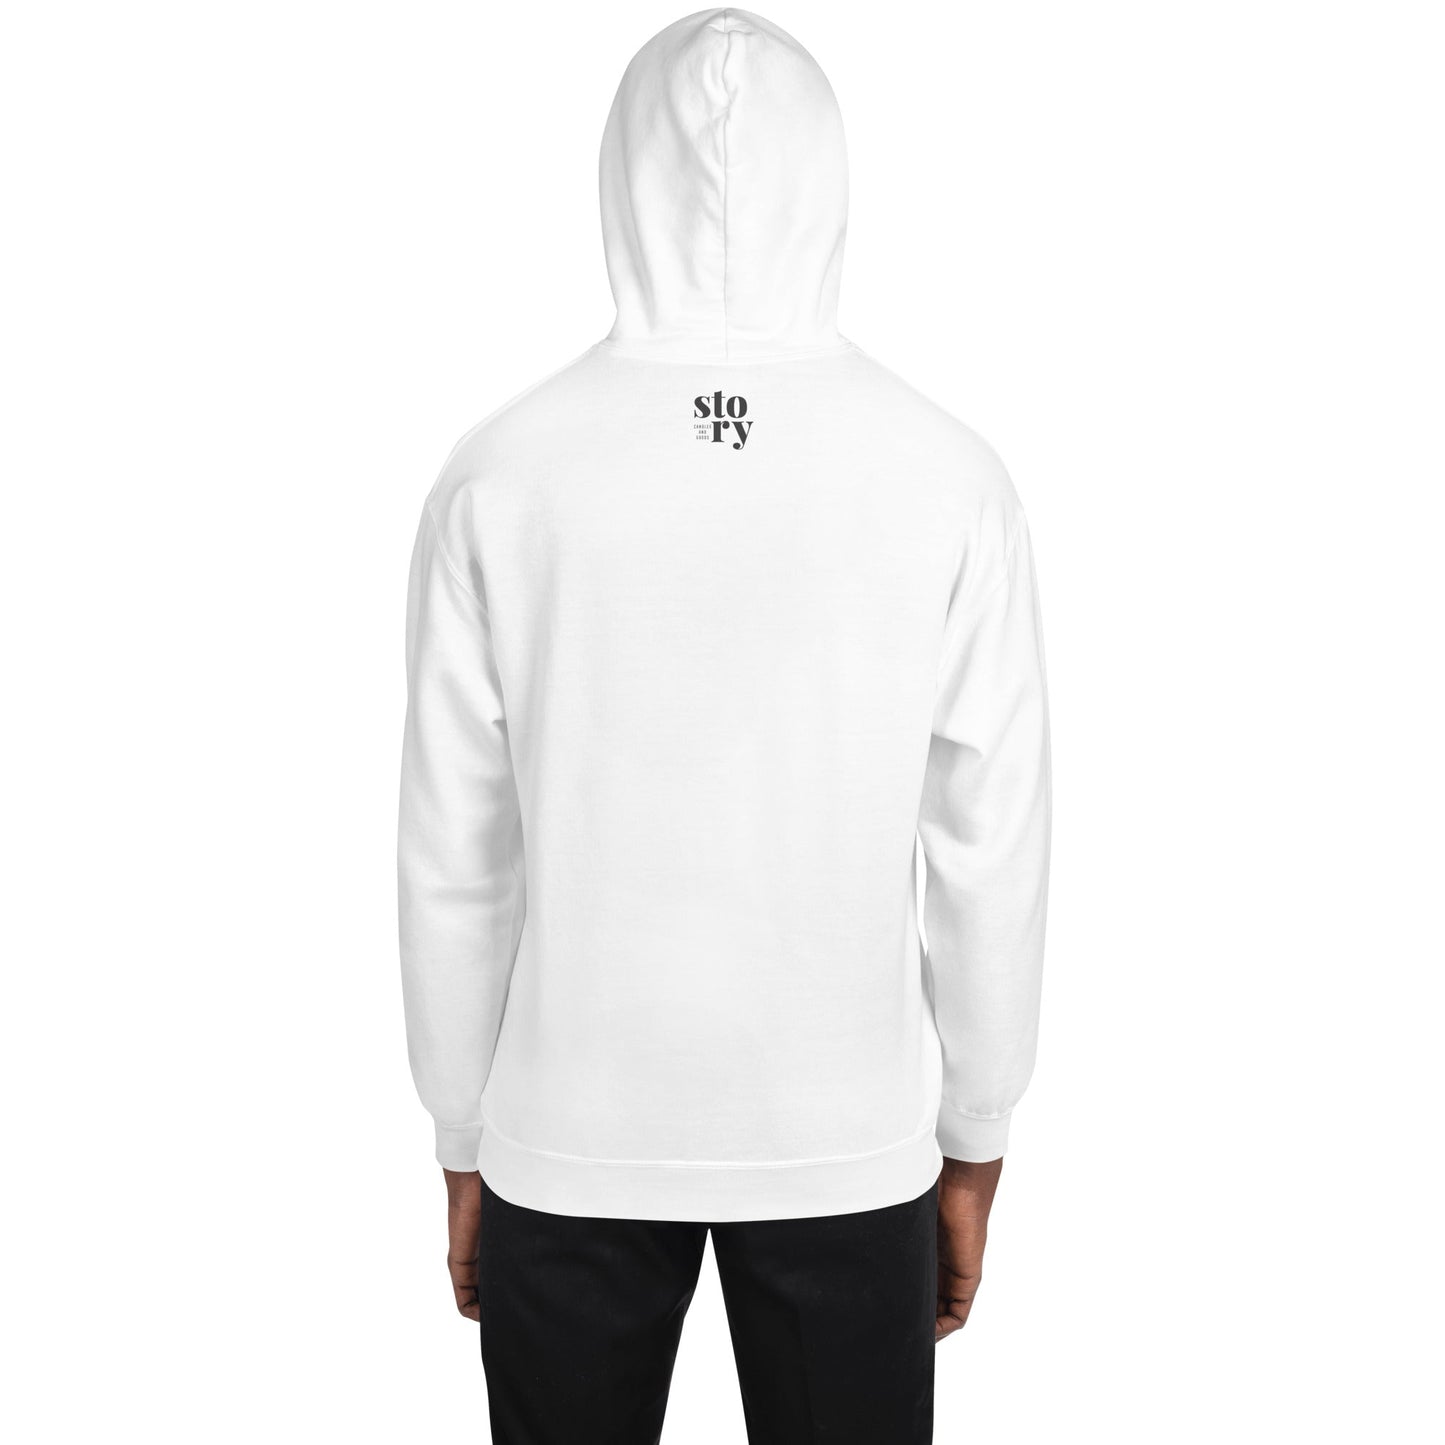 The Plot Thickens Unisex Hoodie